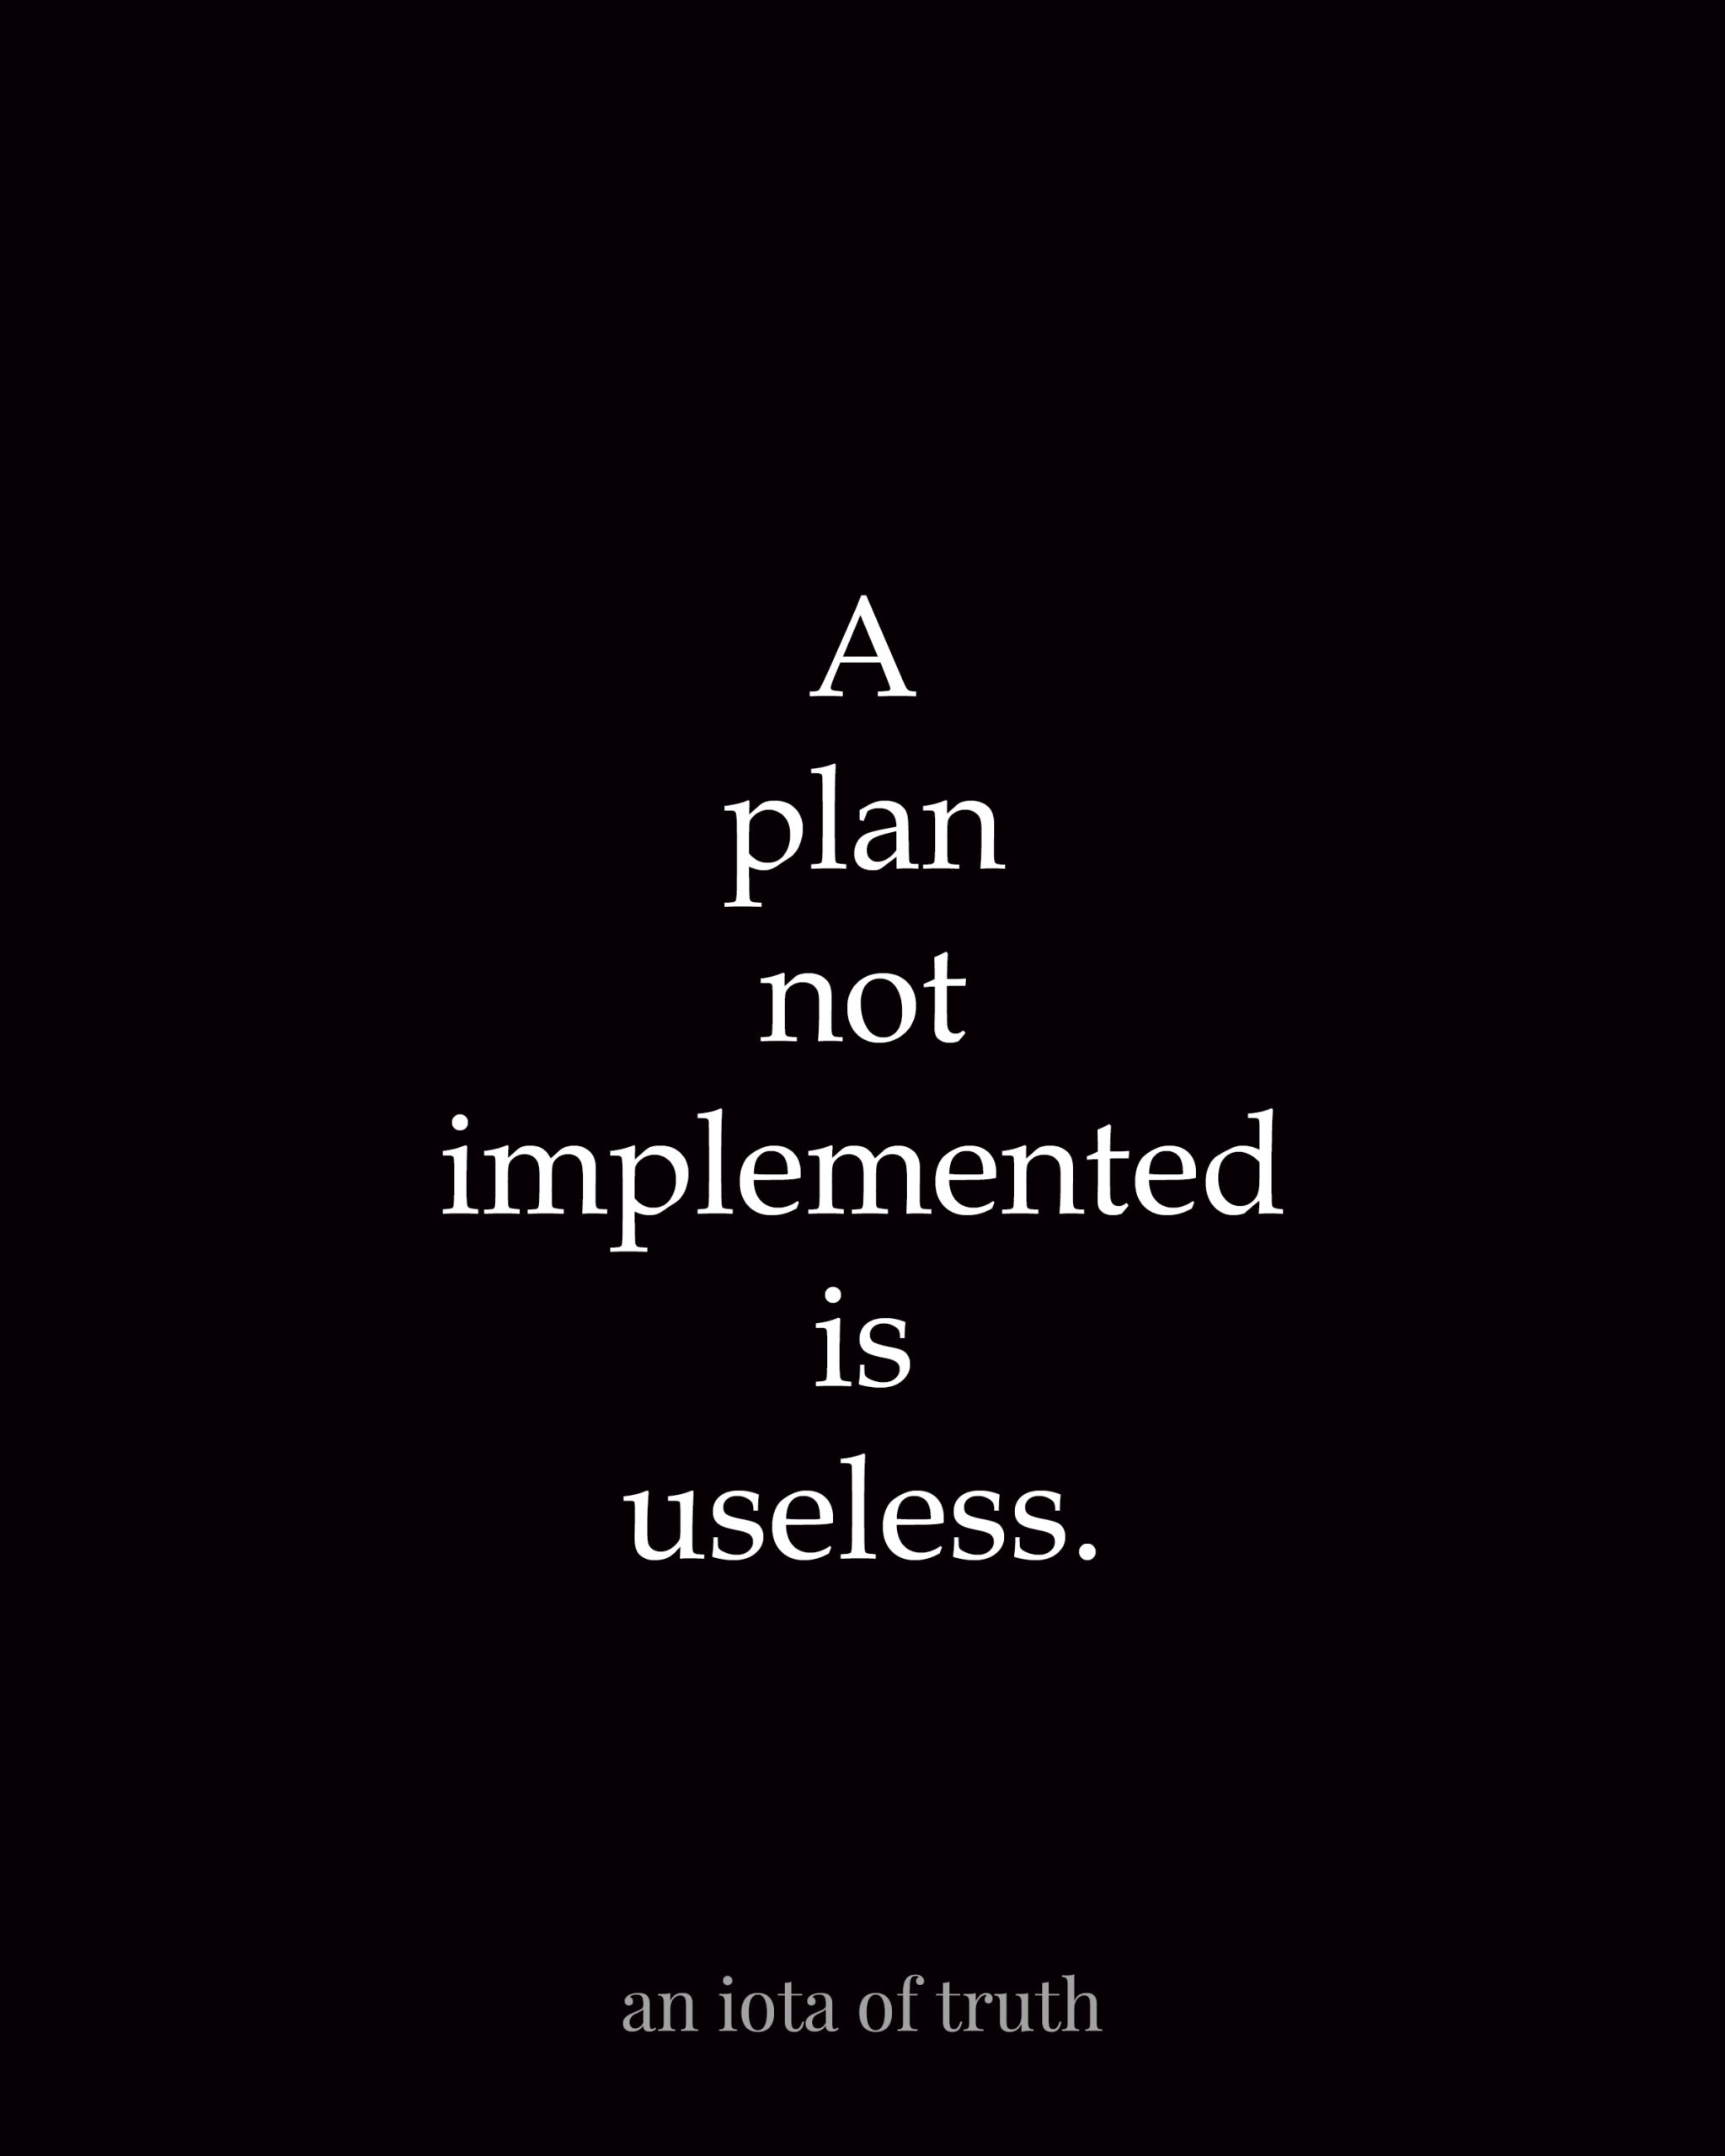 A plan not implemented is useless.